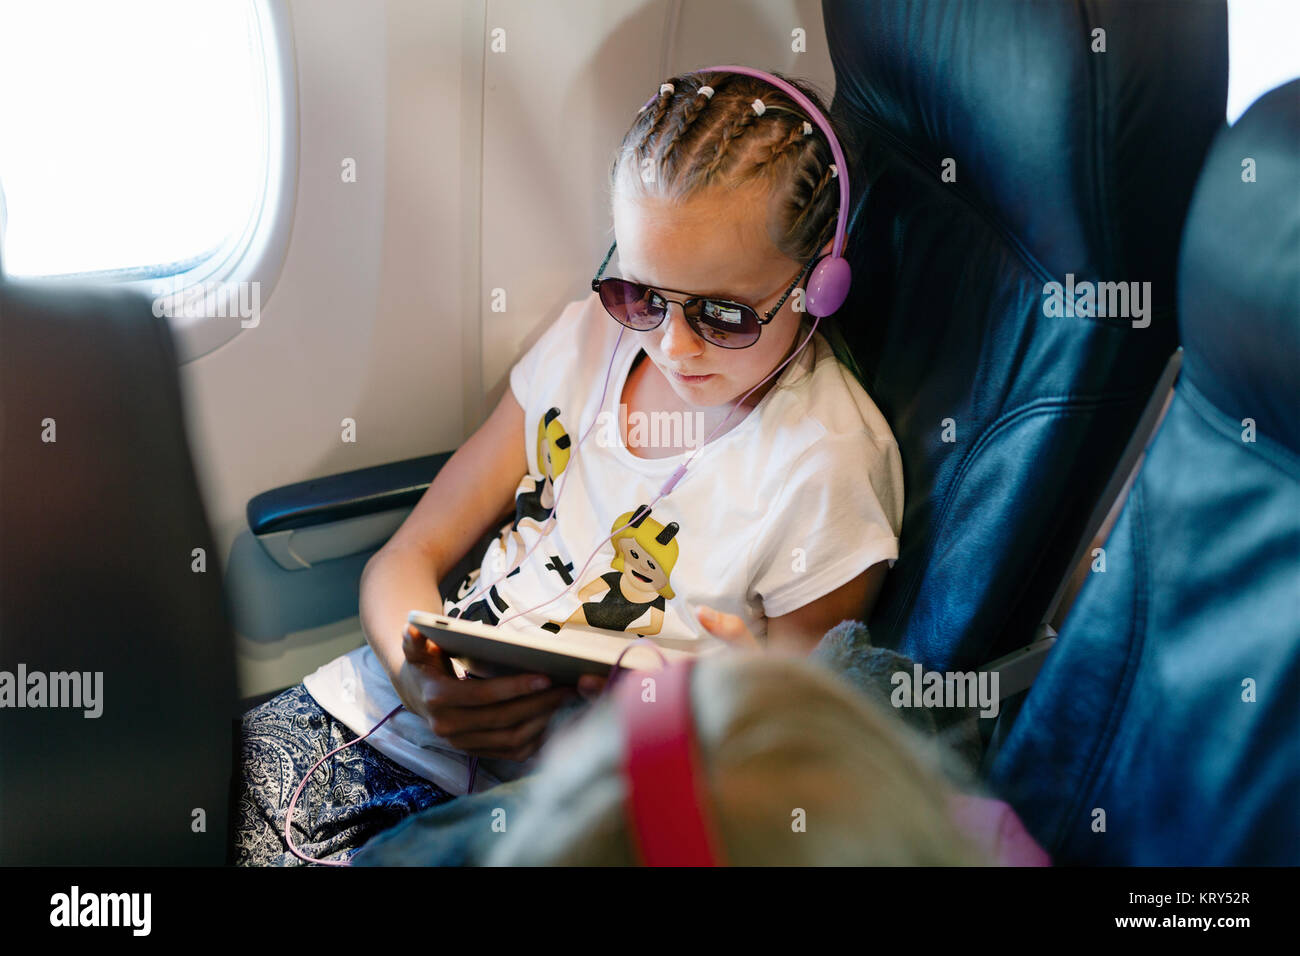 Girl holding a tablet on a plane Stock Photo